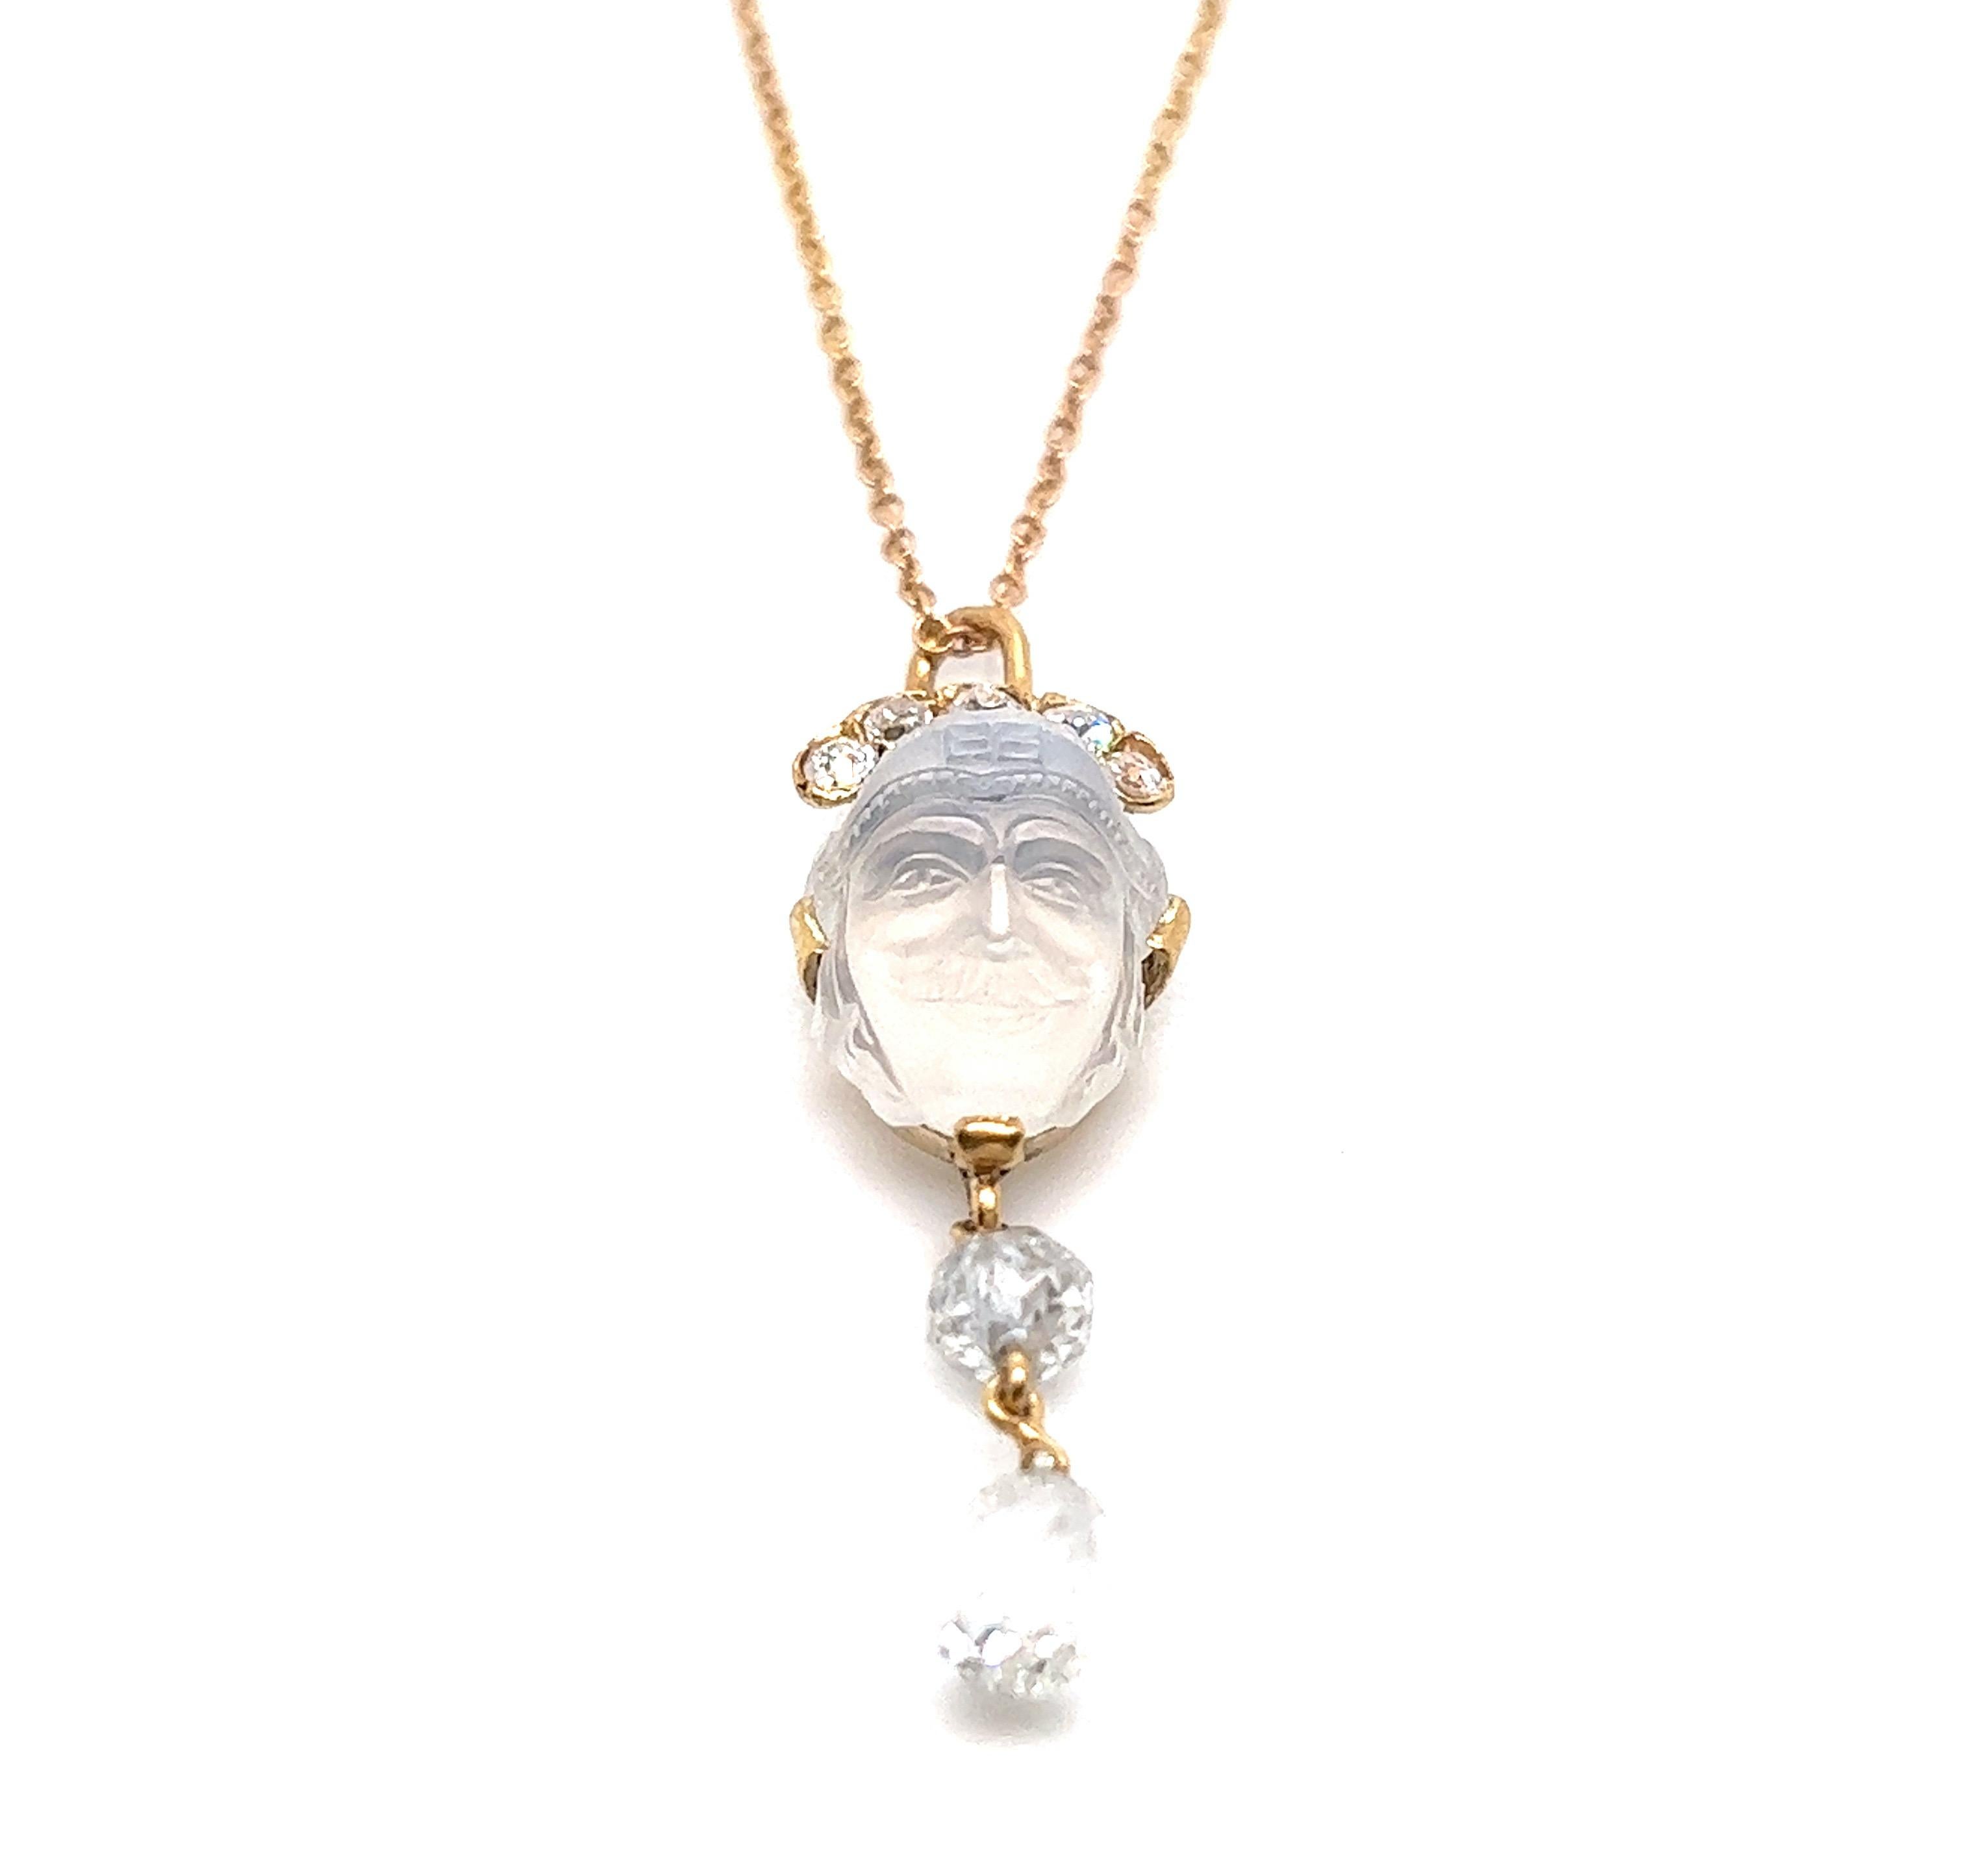 Tiffany & Co. antique moonstone and briolette pendant drop necklace

Carved moonstone of a man's face, round briolette of approximately 1.5 carat, five diamond stones of approximately 0.5 carat, 18 karat yellow gold

Marked: Tiffany & Co., 750